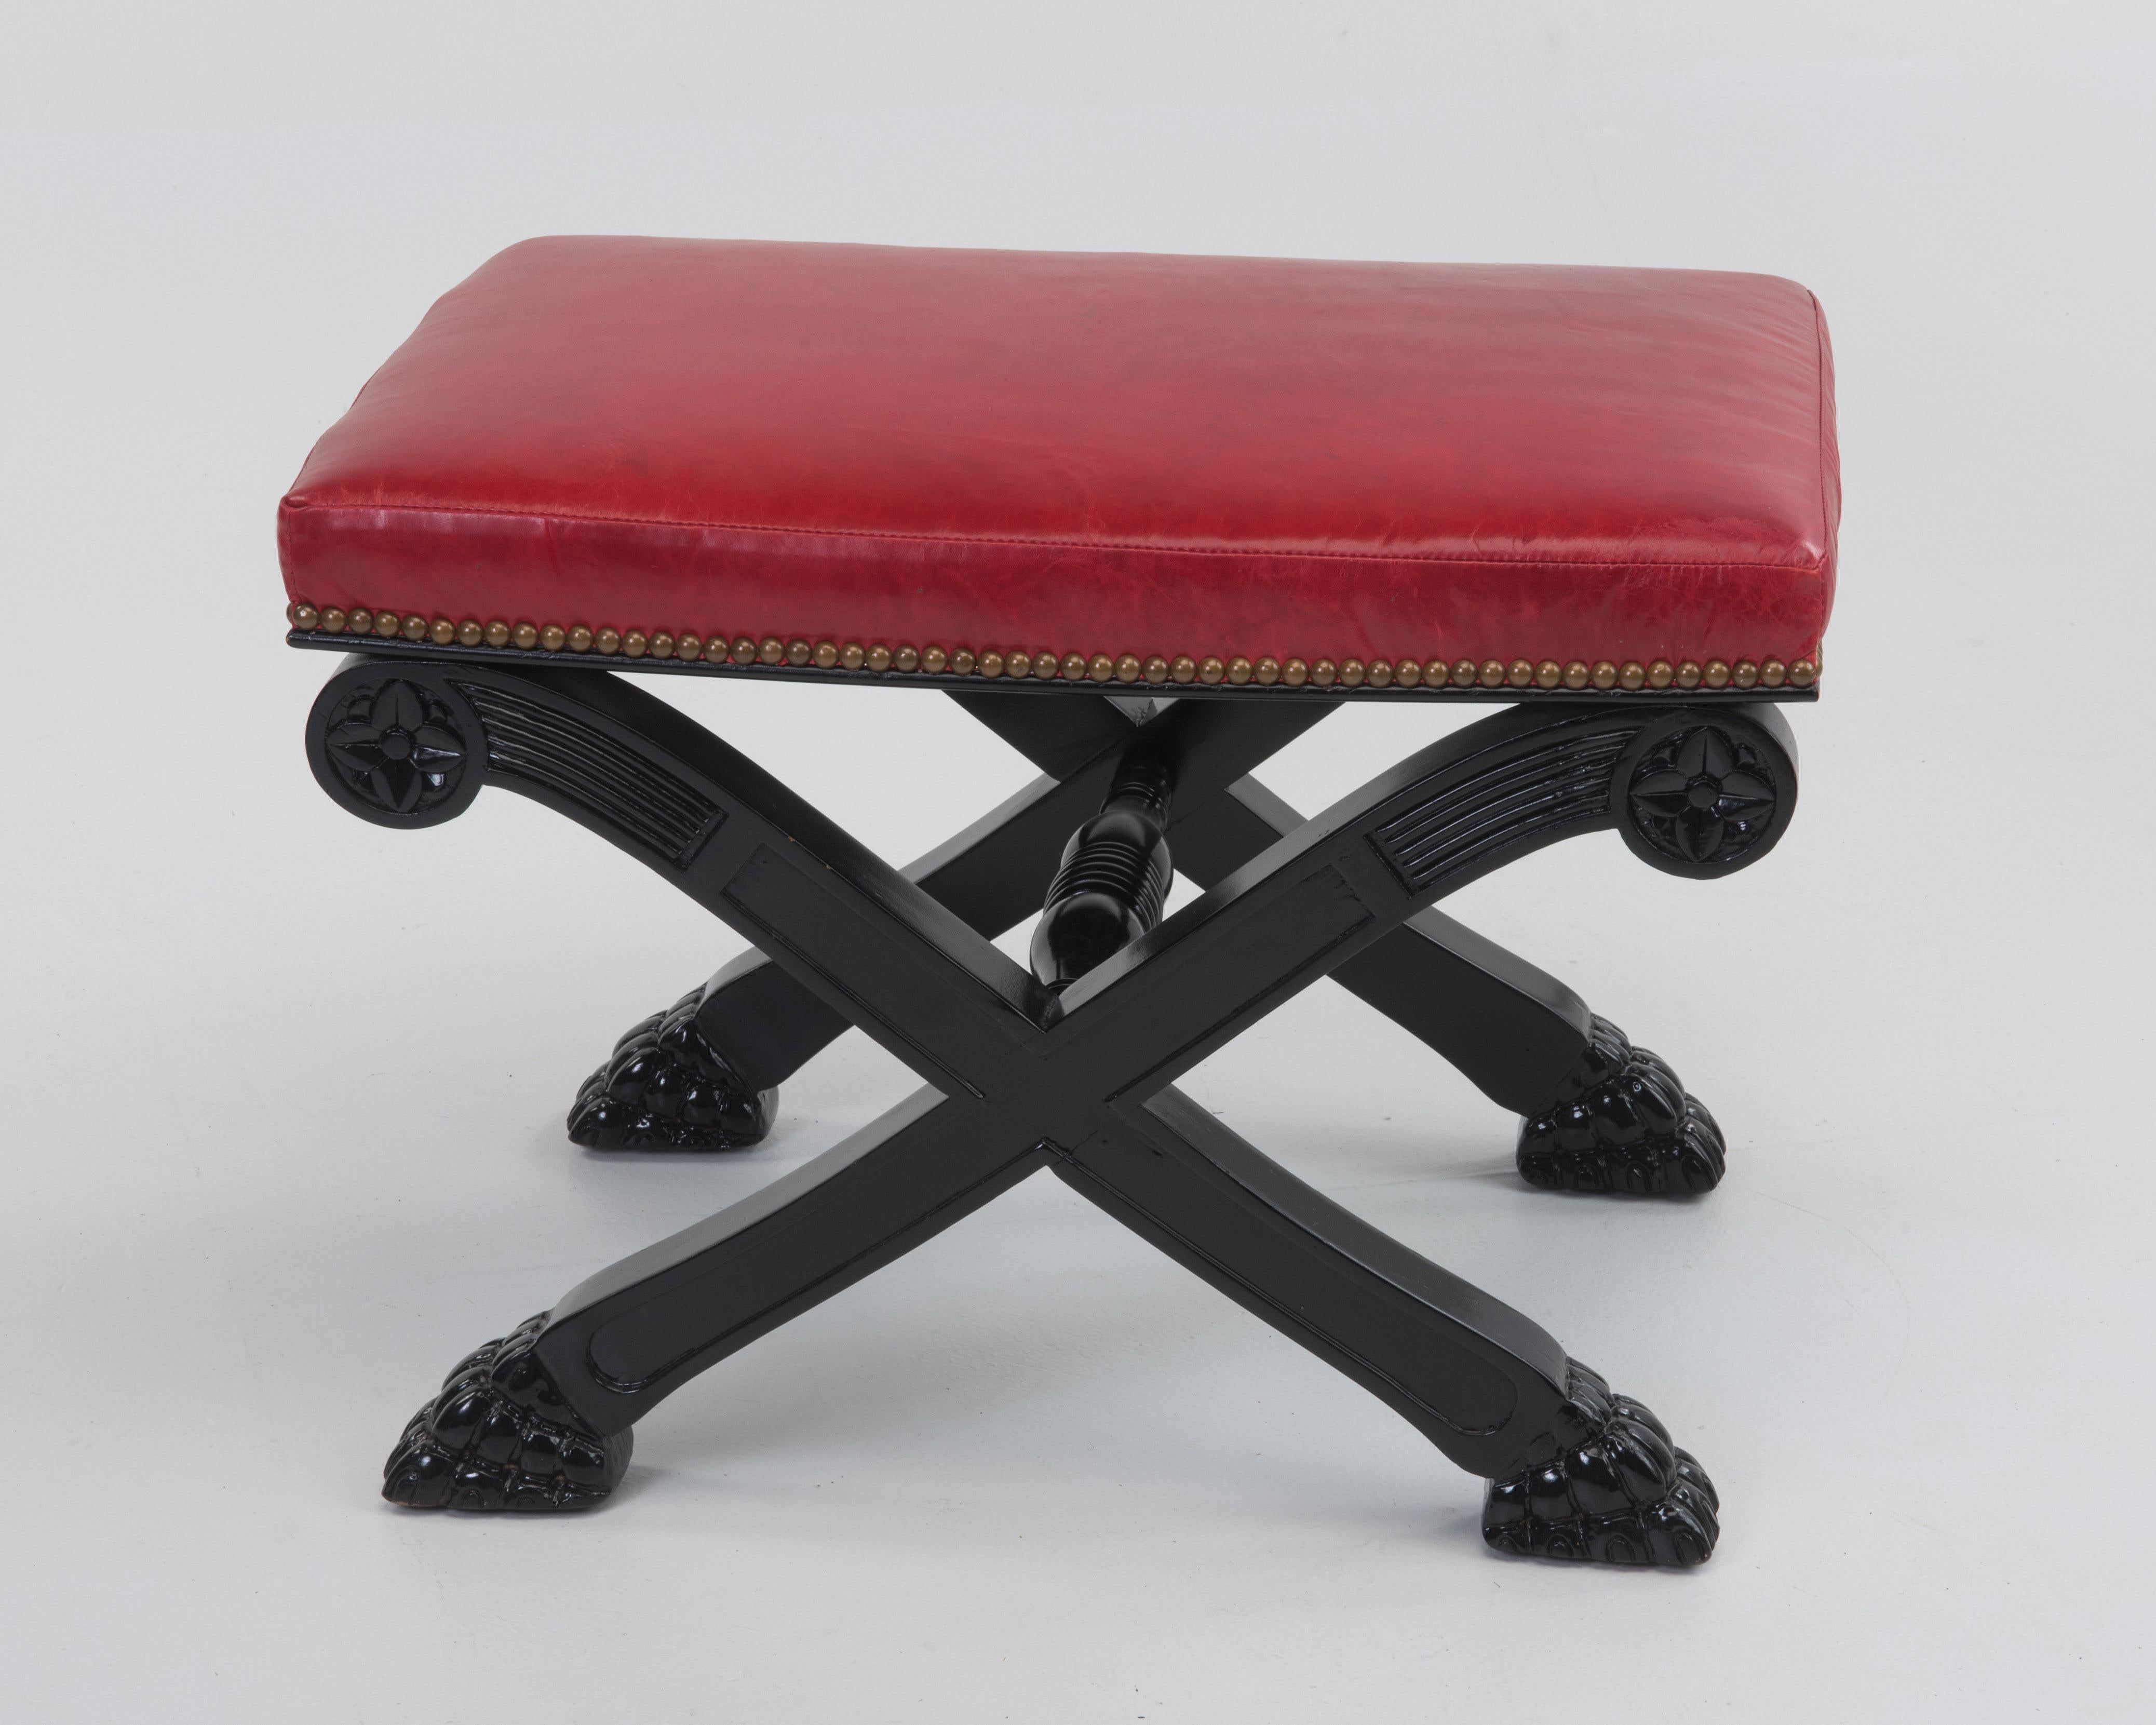 Sassy pair of newly upholstered red leather Hollywood Regency benches having ebonized X motife bases with paw feet. Brass nailheads give a polished finish.